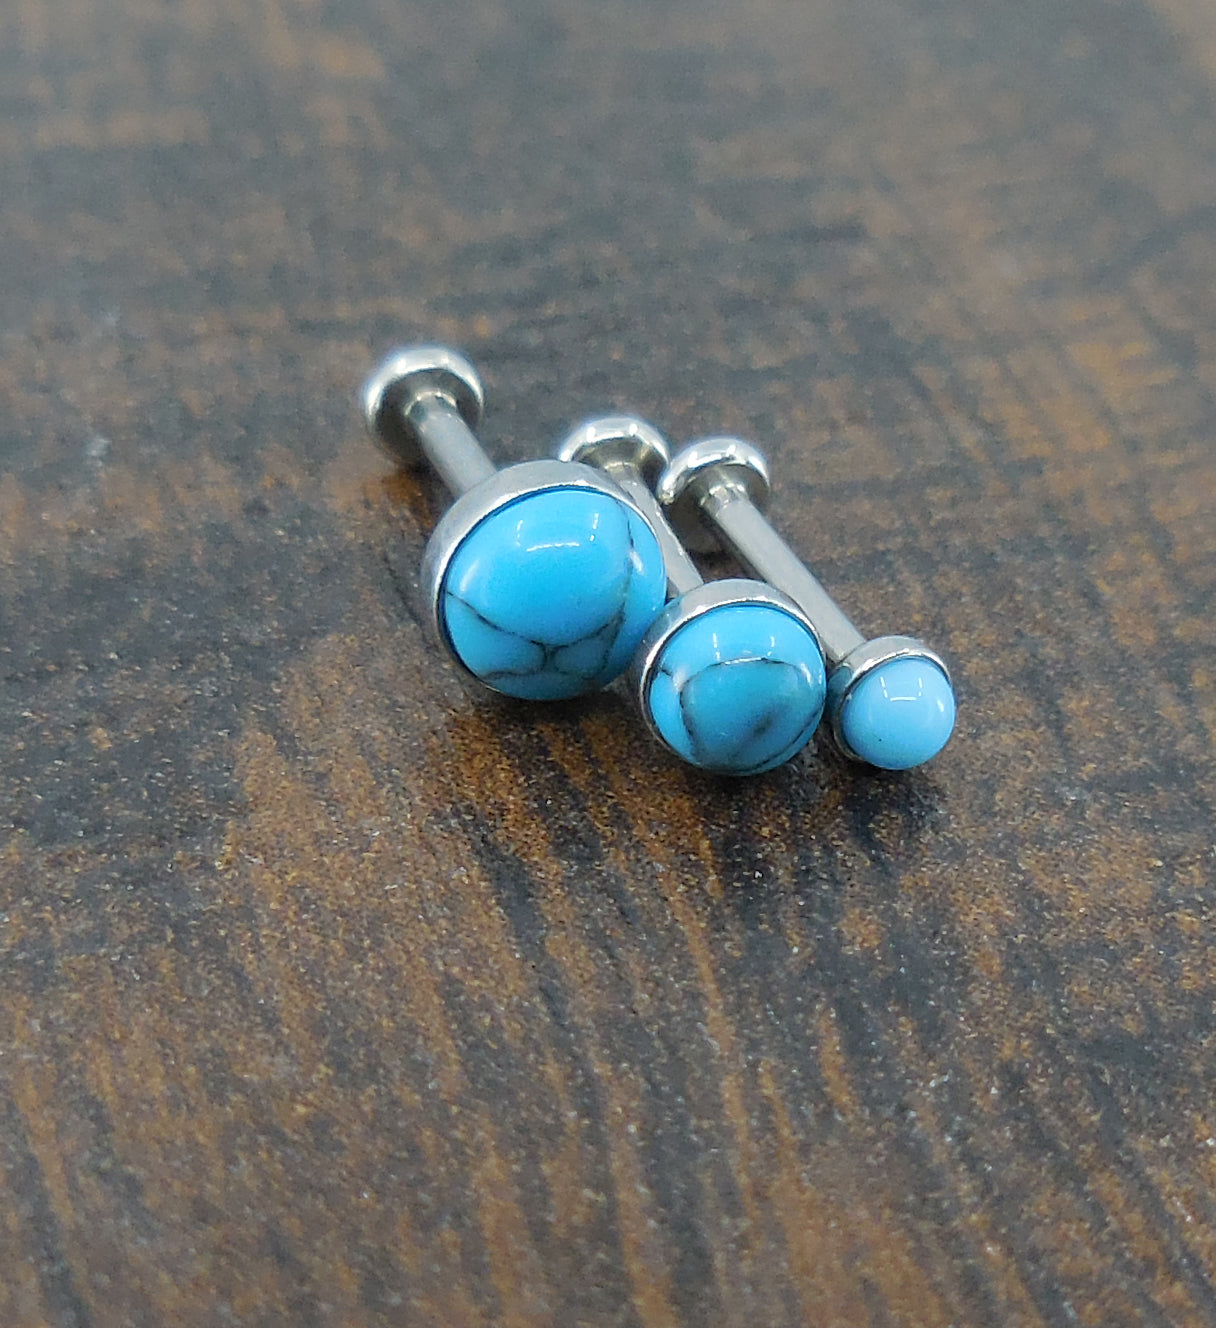 16G, 18G, 20G 2-4mm Tragus Natural Turquoise Stone Threadless 5-10mm Push Pin Triple Helix Nose Ring Labret Lip Earrings Steel Cartilage